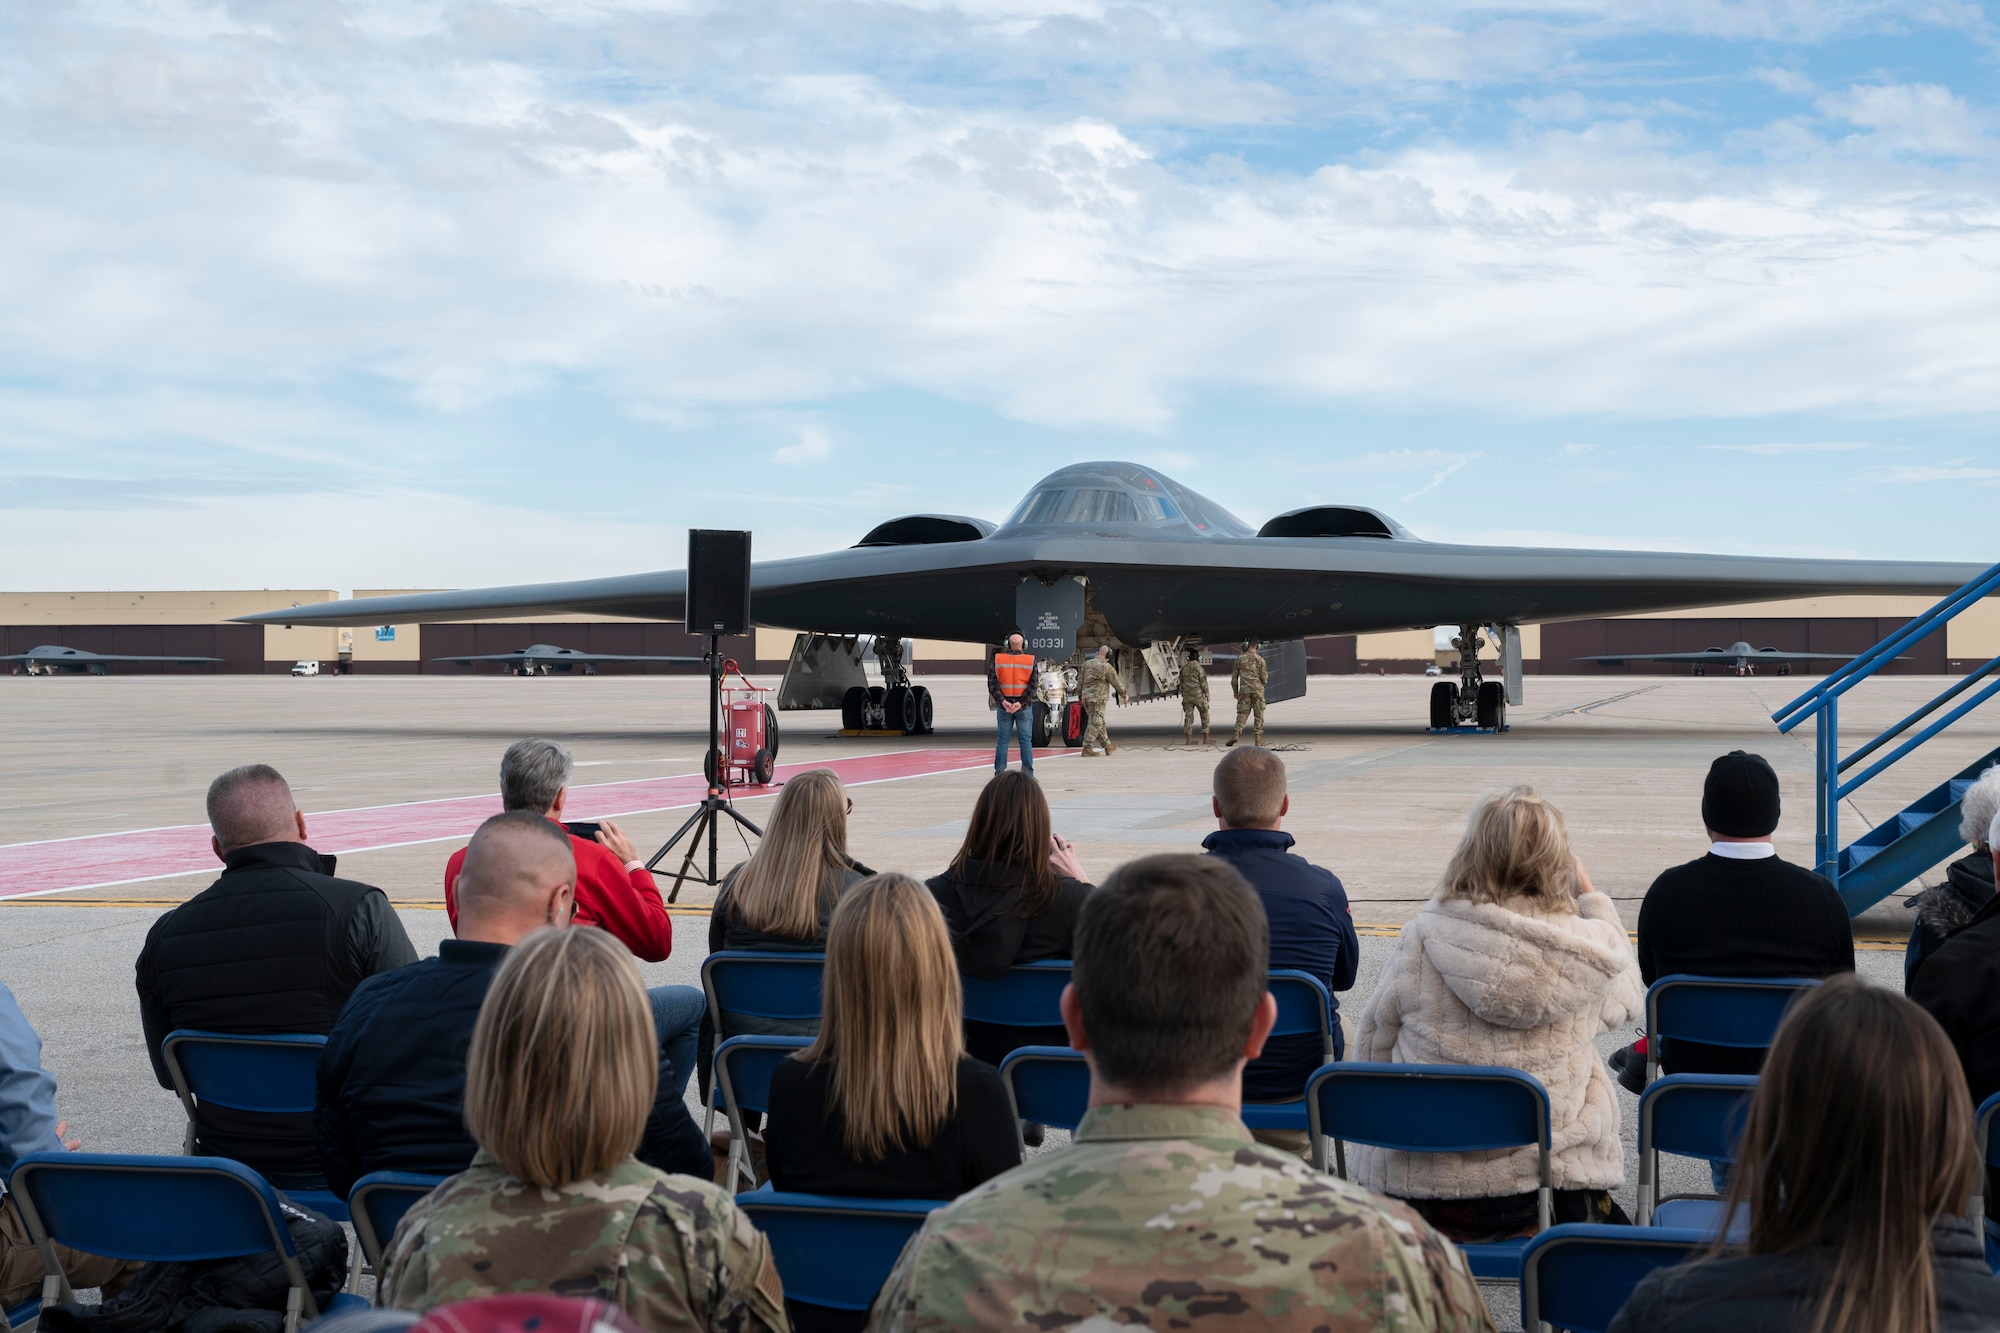 Members of the 509th Bomb Wing conduct post-flight operations for a B-2 Spirit stealth bomber during a ceremony at Whiteman Air Force Base, Mo., Dec. 15, 2023. The ceremony reenacted the delivery of the installation’s first B-2, Spirit of Missouri on Dec. 17, 1993. (U.S. Air Force photo by Tech. Sgt. Anthony Hetlage)